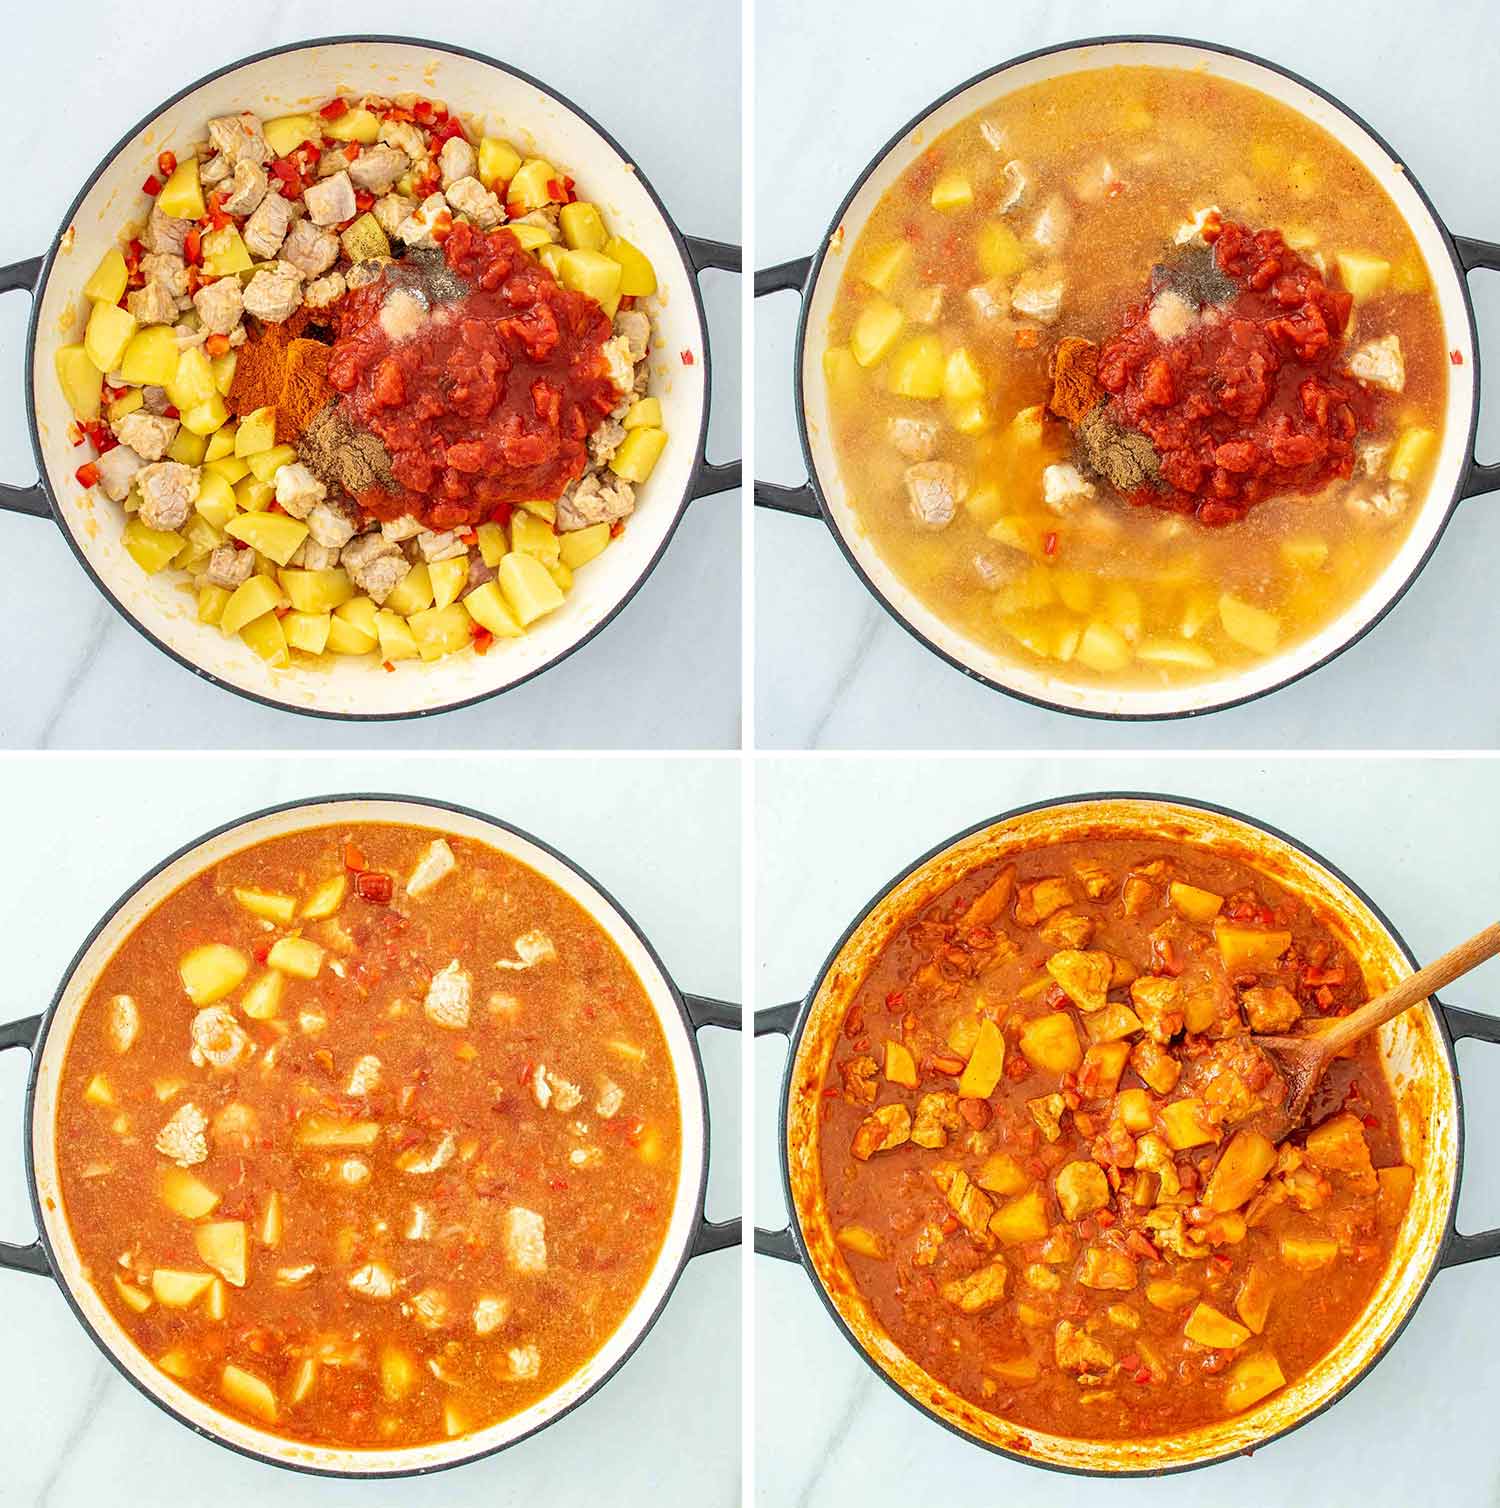 process shots showing how to make pork and potato stew.